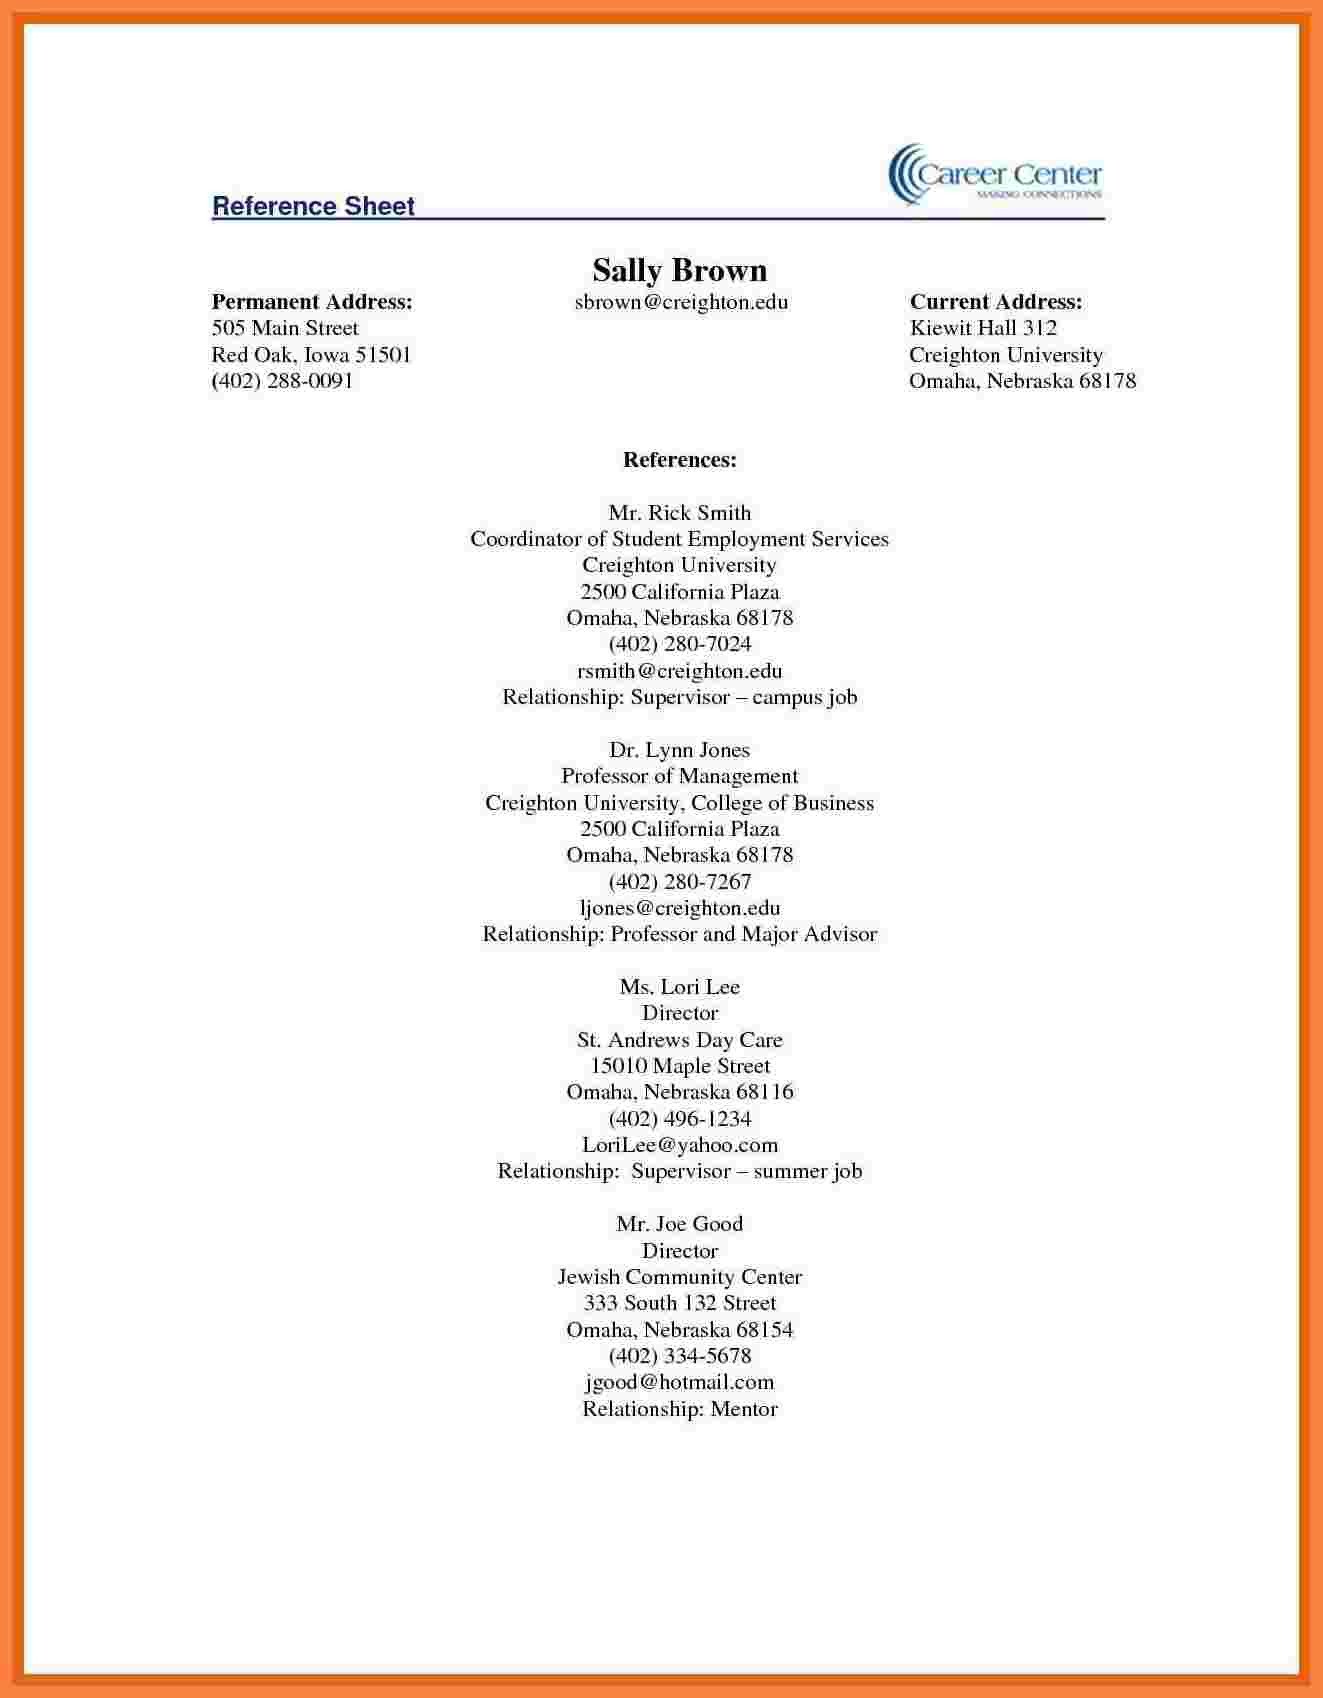 Reference Sheet for Resume Template 5 Reference Sheet for Resume Template